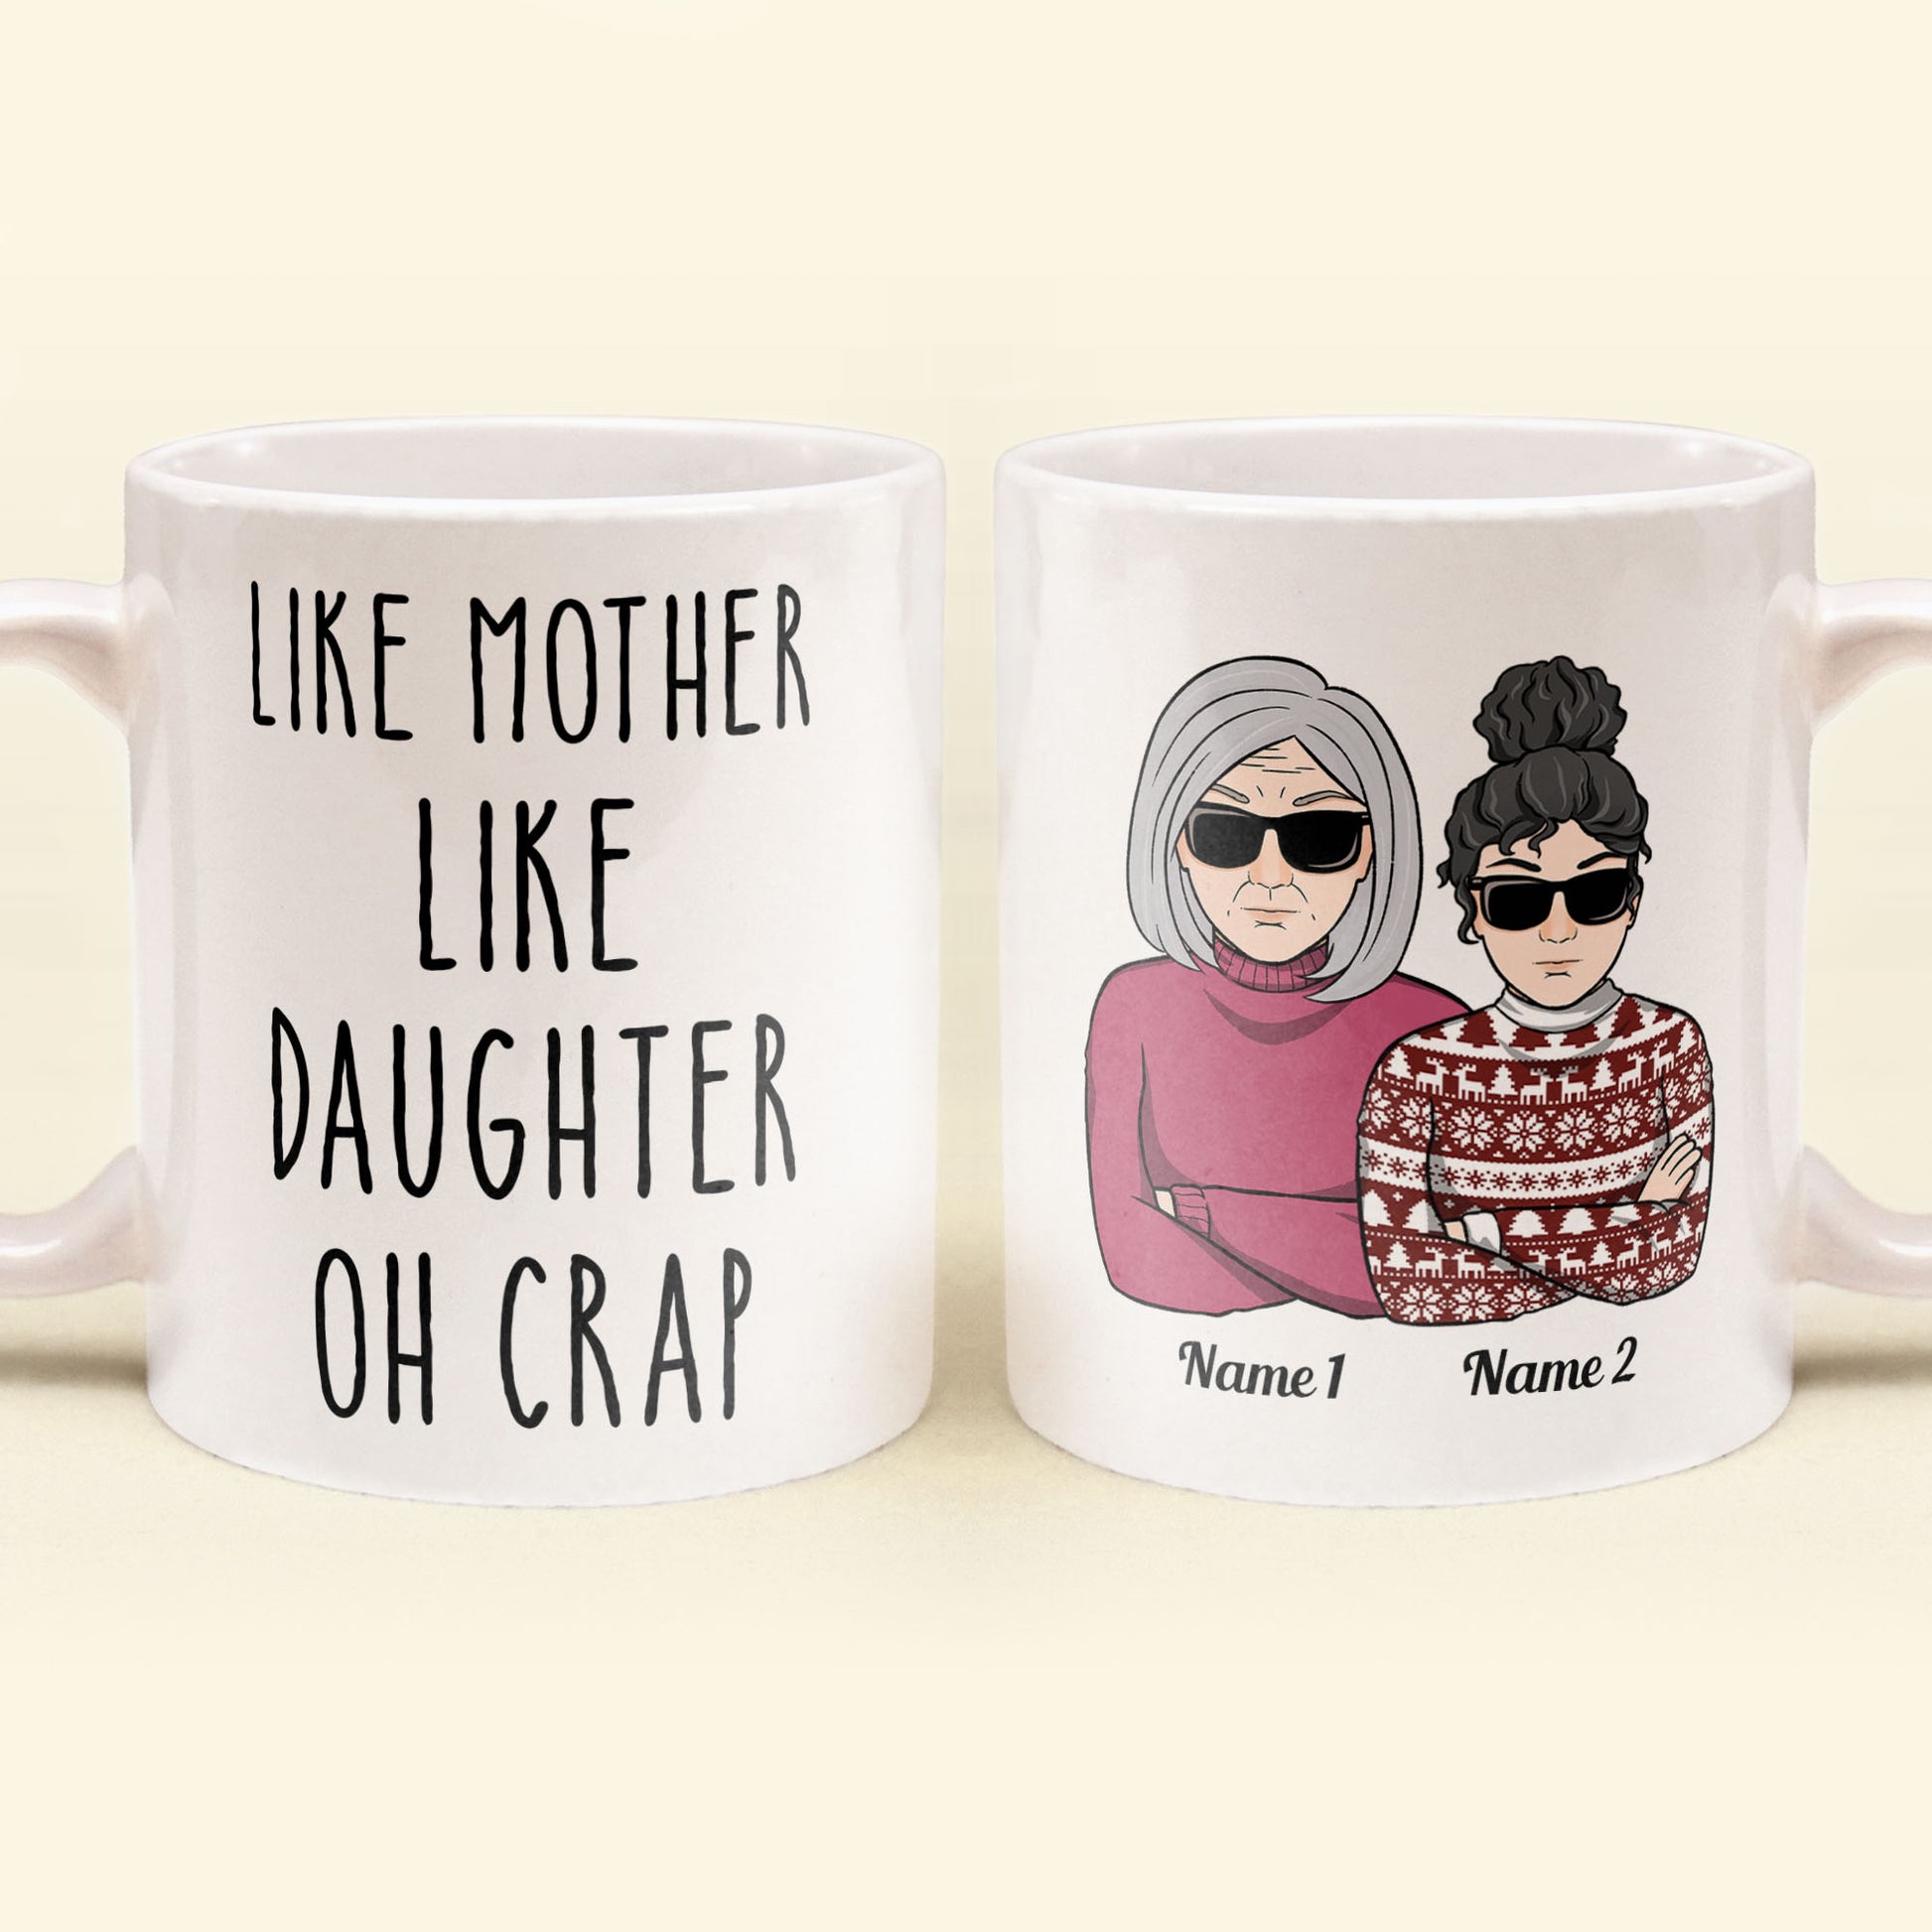 https://macorner.co/cdn/shop/products/Like-Father-Like-Daughter-Oh-Crap-Personalized-Mug-Christmas-Gift-For-Fathers_-Mothers_-Grandpas_-Grandmas_-Sons-_-Daughters_2_776ef8ab-7ccf-4f6d-a1b4-a8ad61ed8fa3.jpg?v=1636361983&width=1946